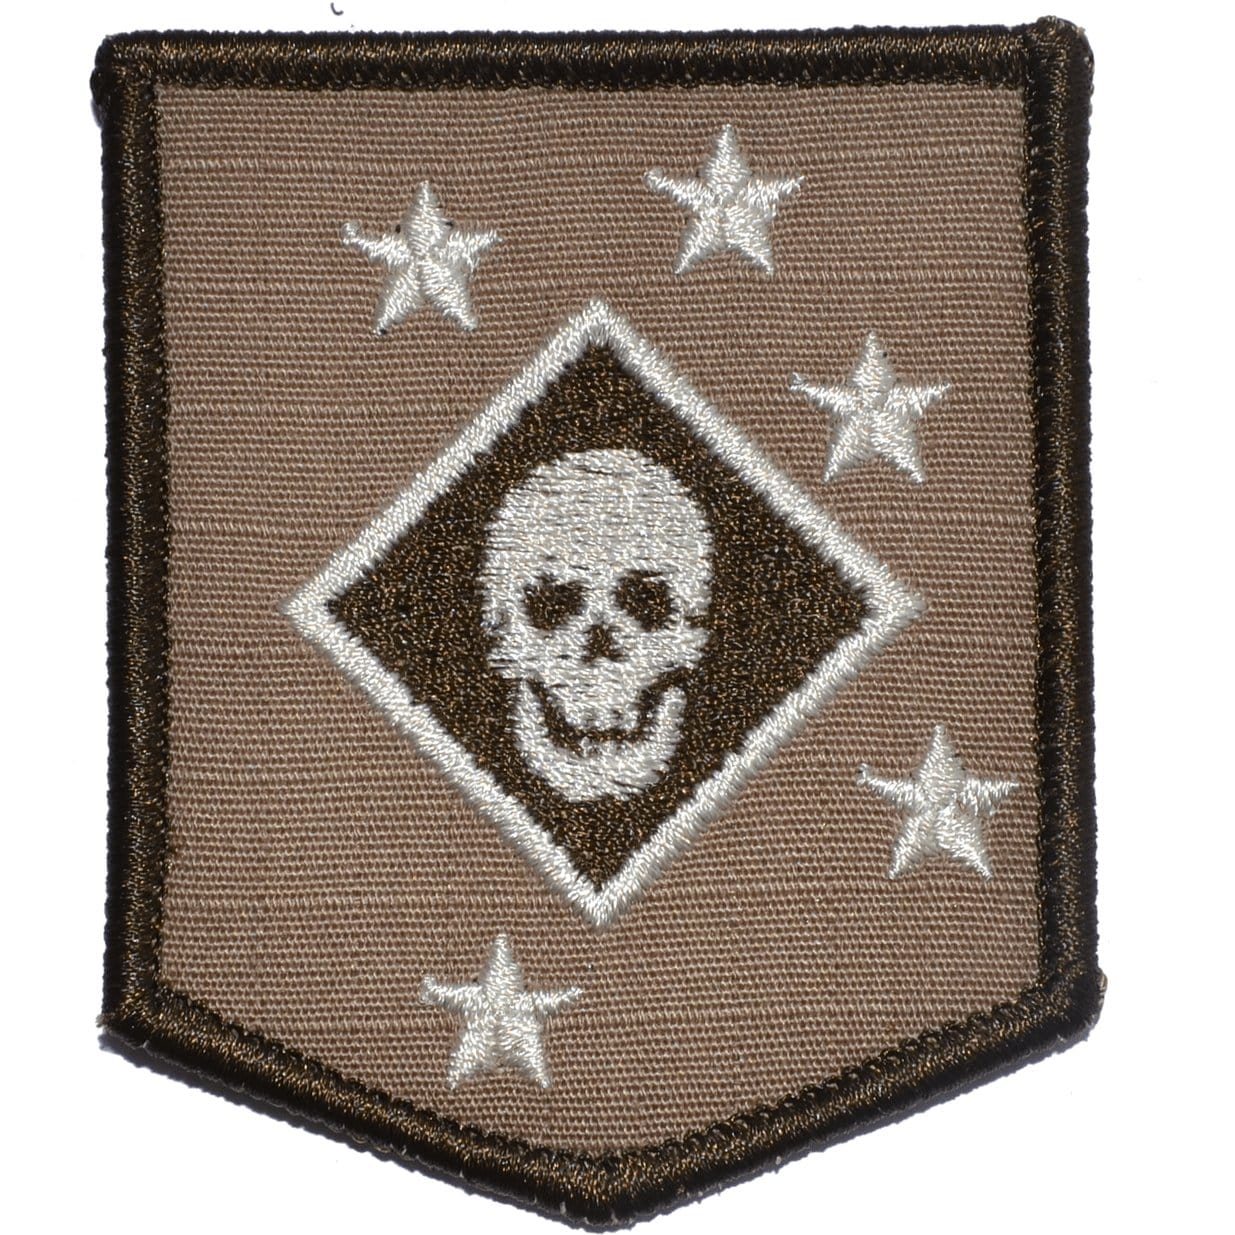 Tactical Gear Junkie Patches Coyote Brown Marine Raider Battalion Thick Jaw Patch MarSOC - Shield Patch